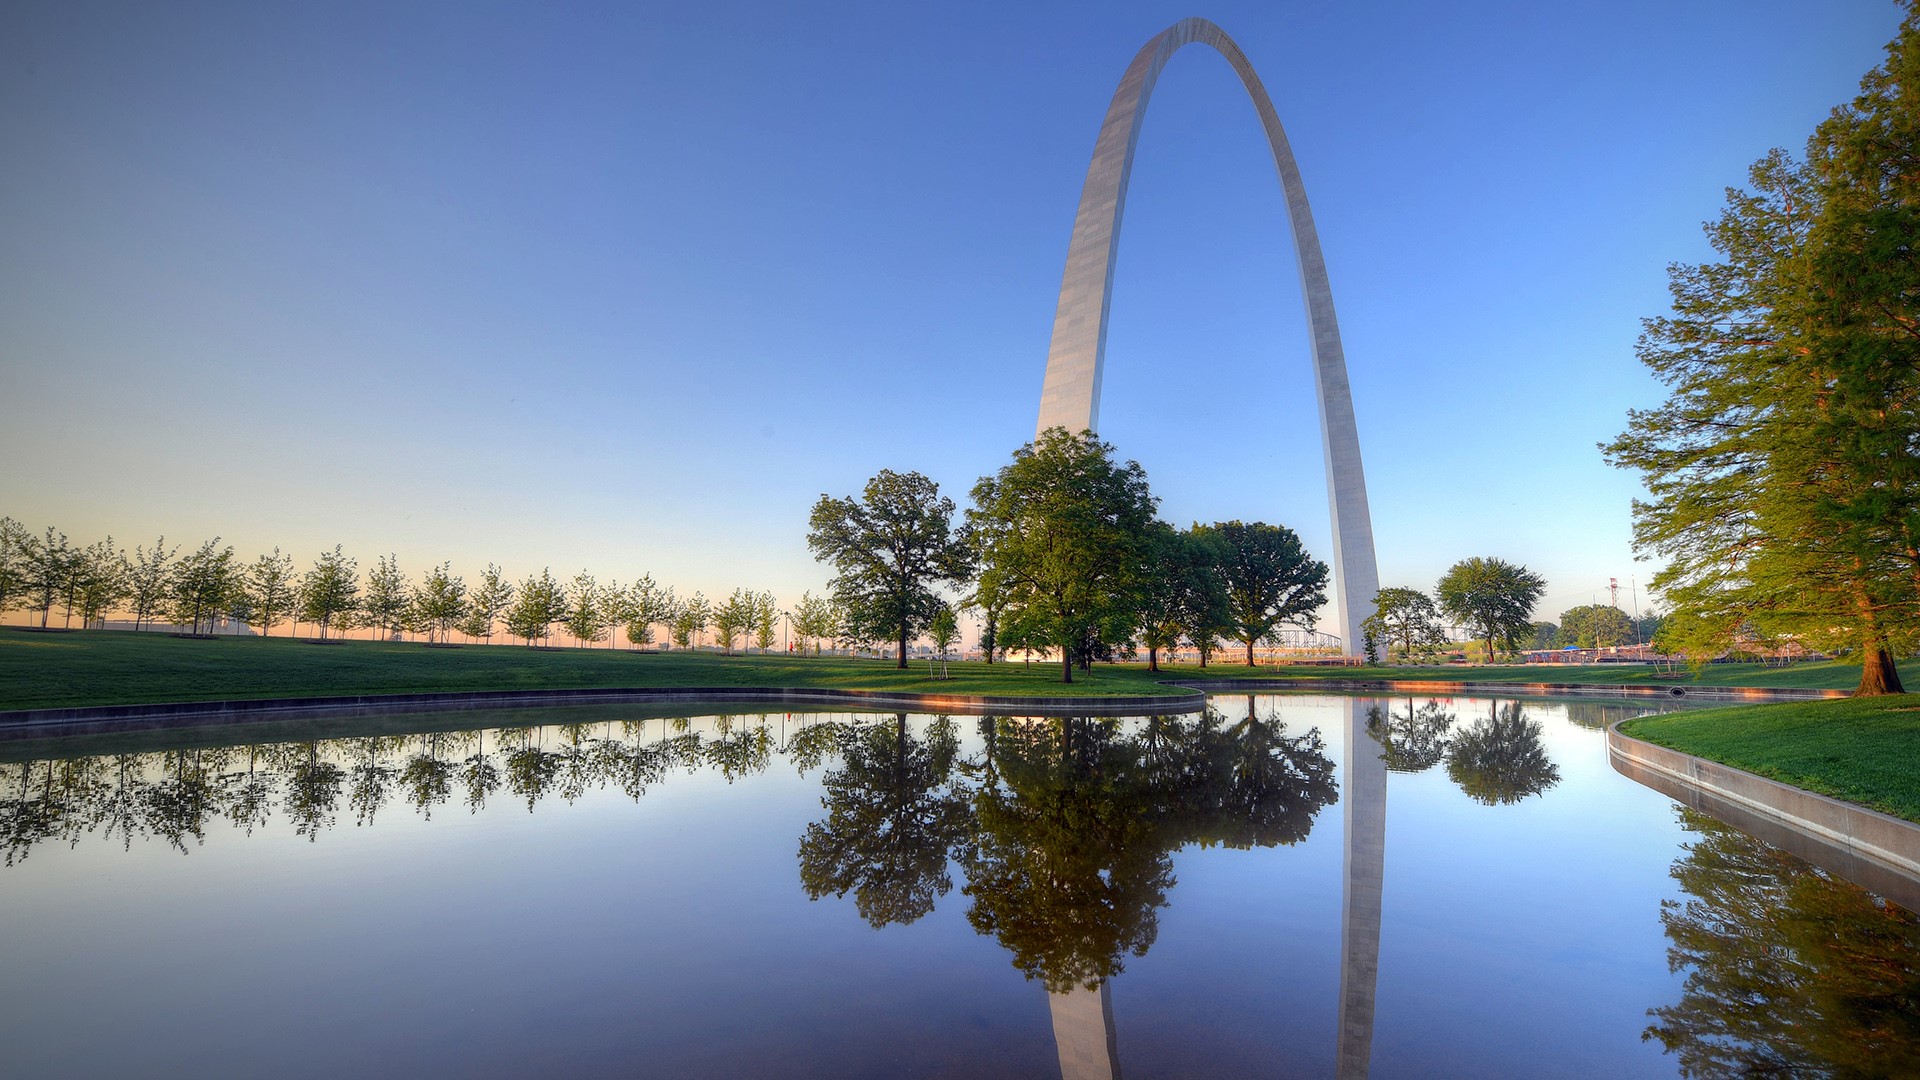 The Gateway Arch monument in St. Louis, Missouri, USA | Windows 10 Spotlight Images